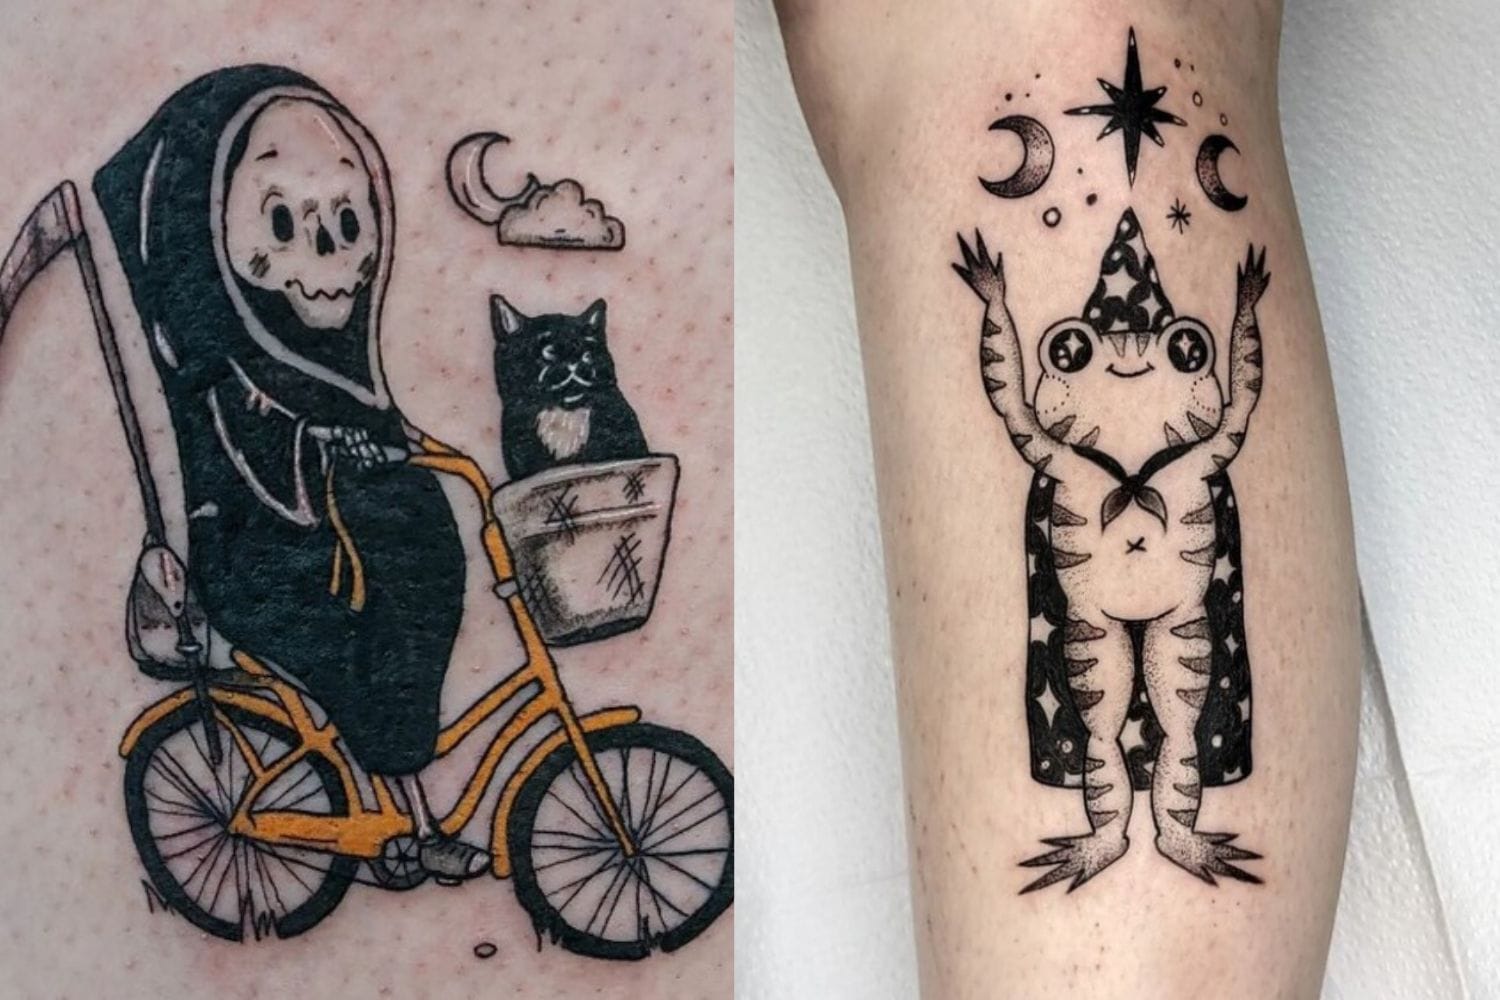 Lil ghost by Eli Ling at Short North Tattoo in Columbus OH   rtattoos